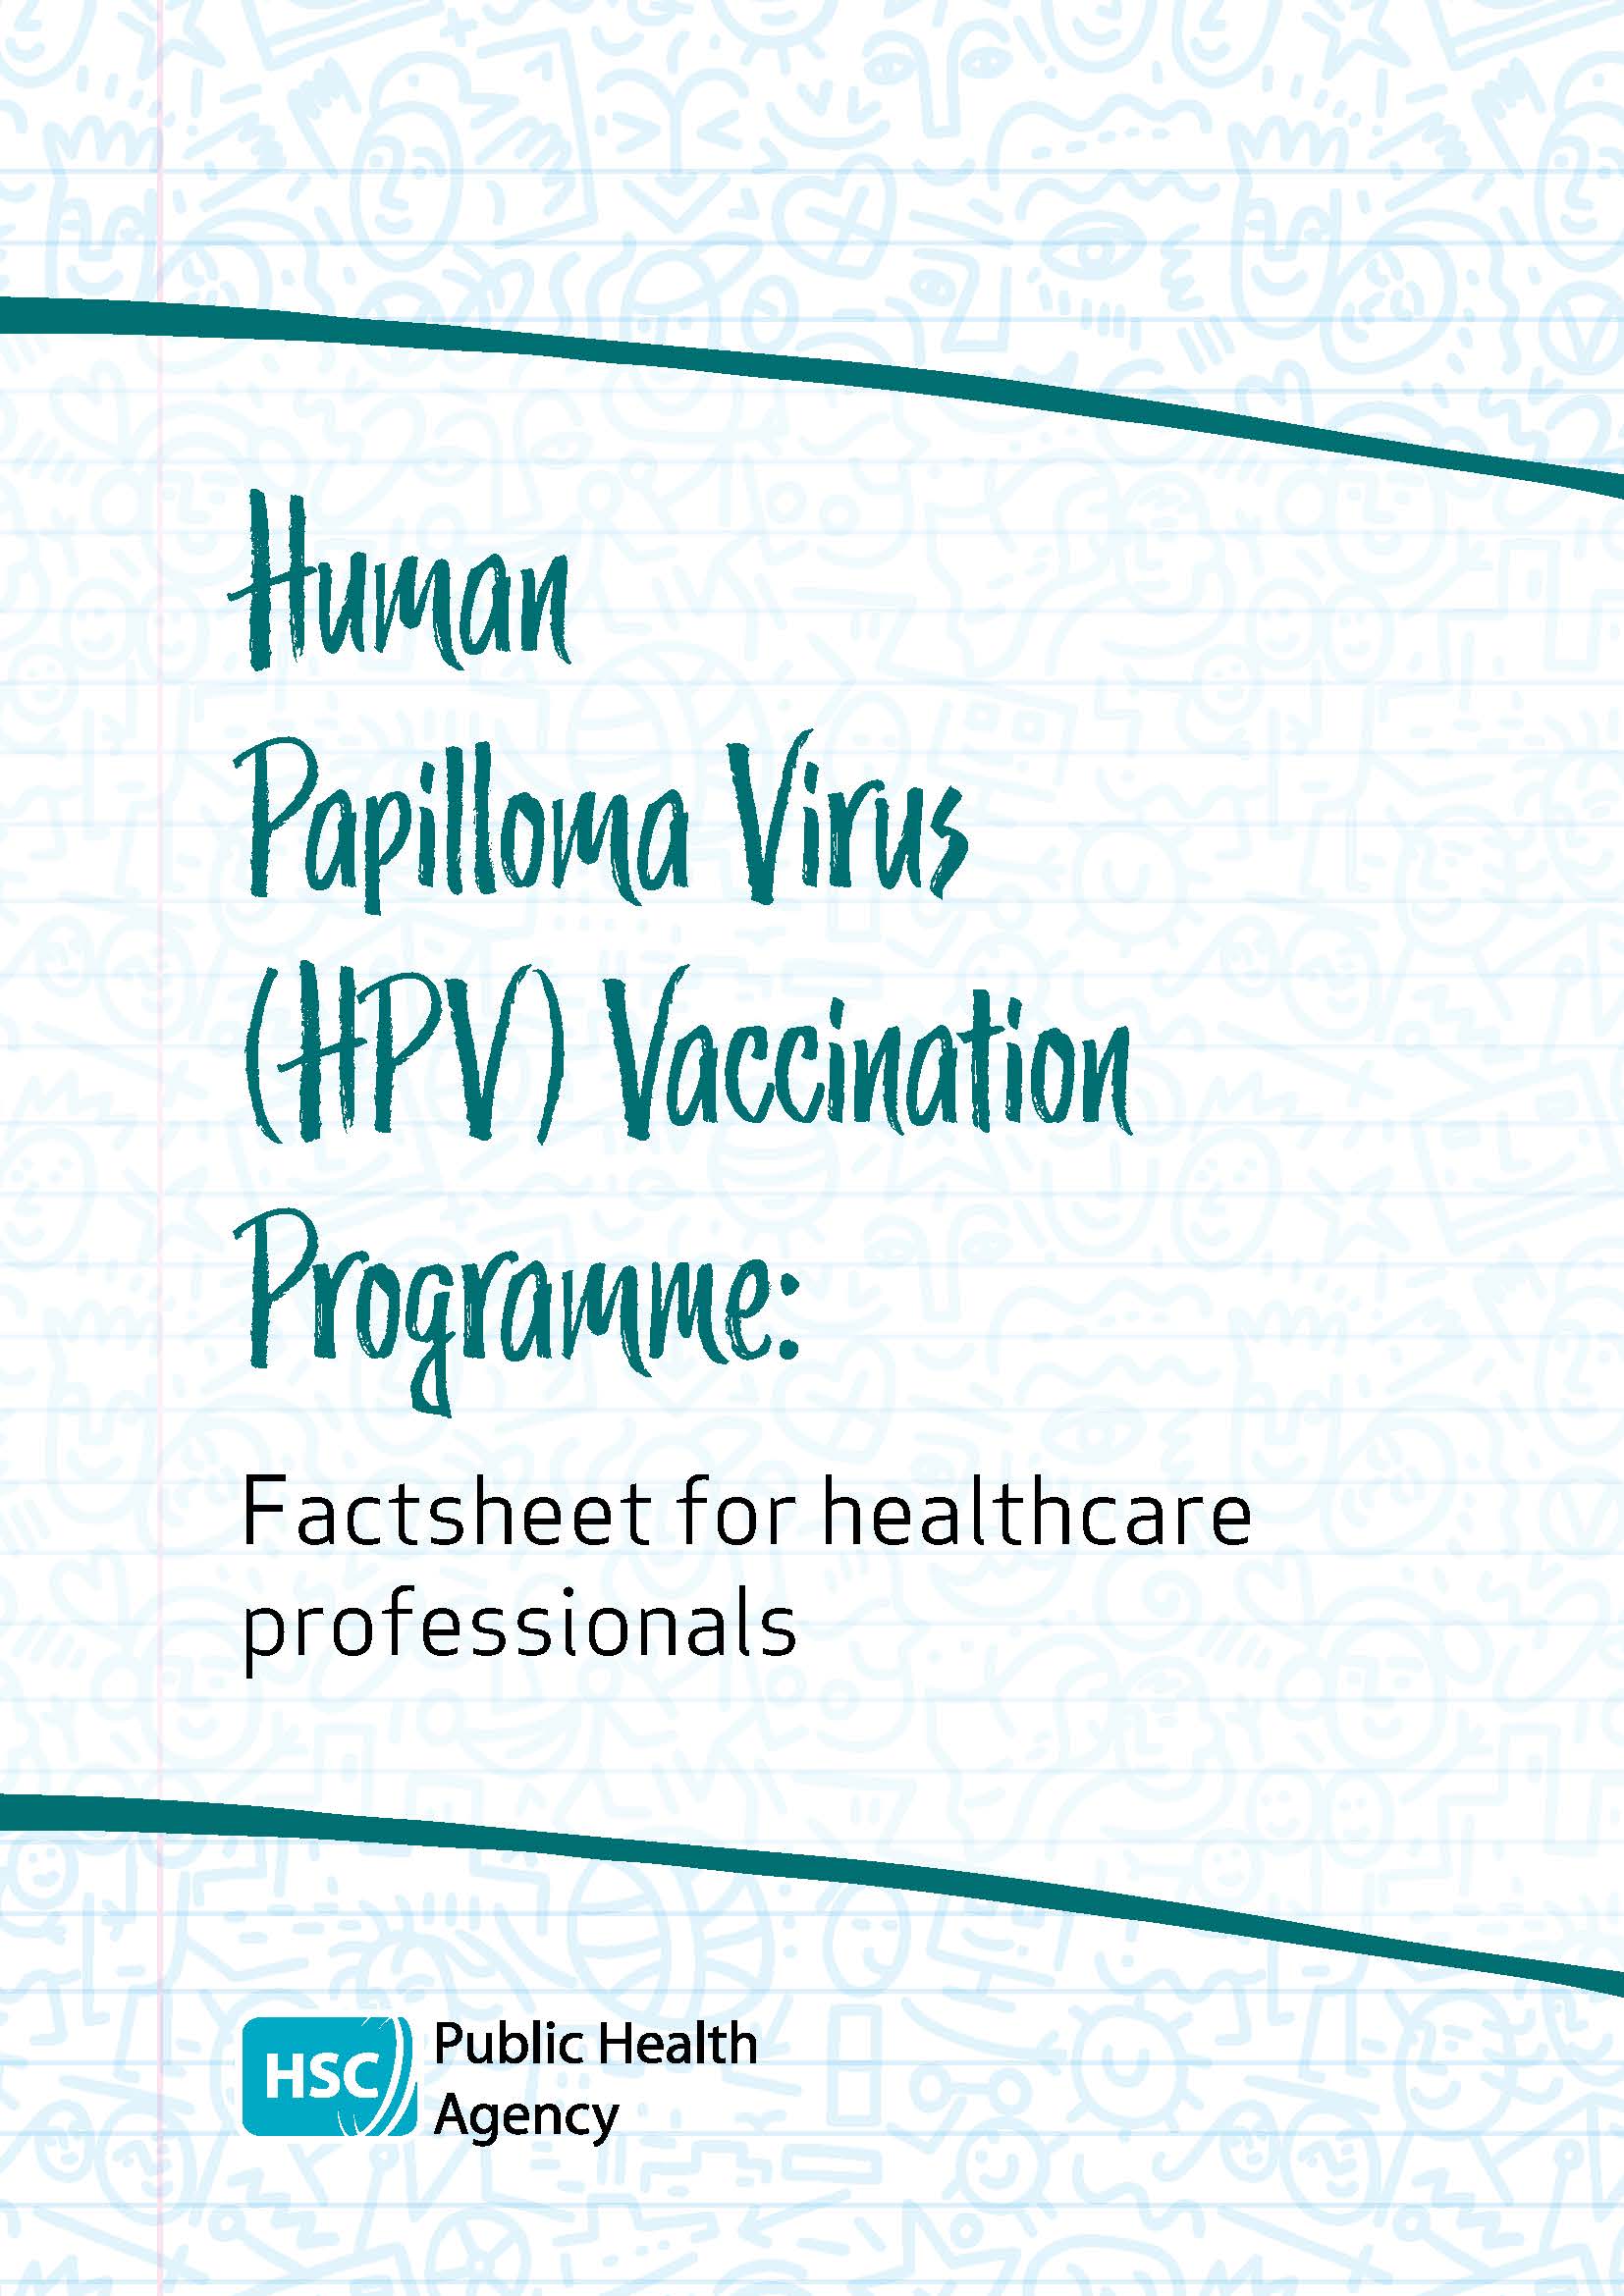 Cover of HPV factsheet for professionals